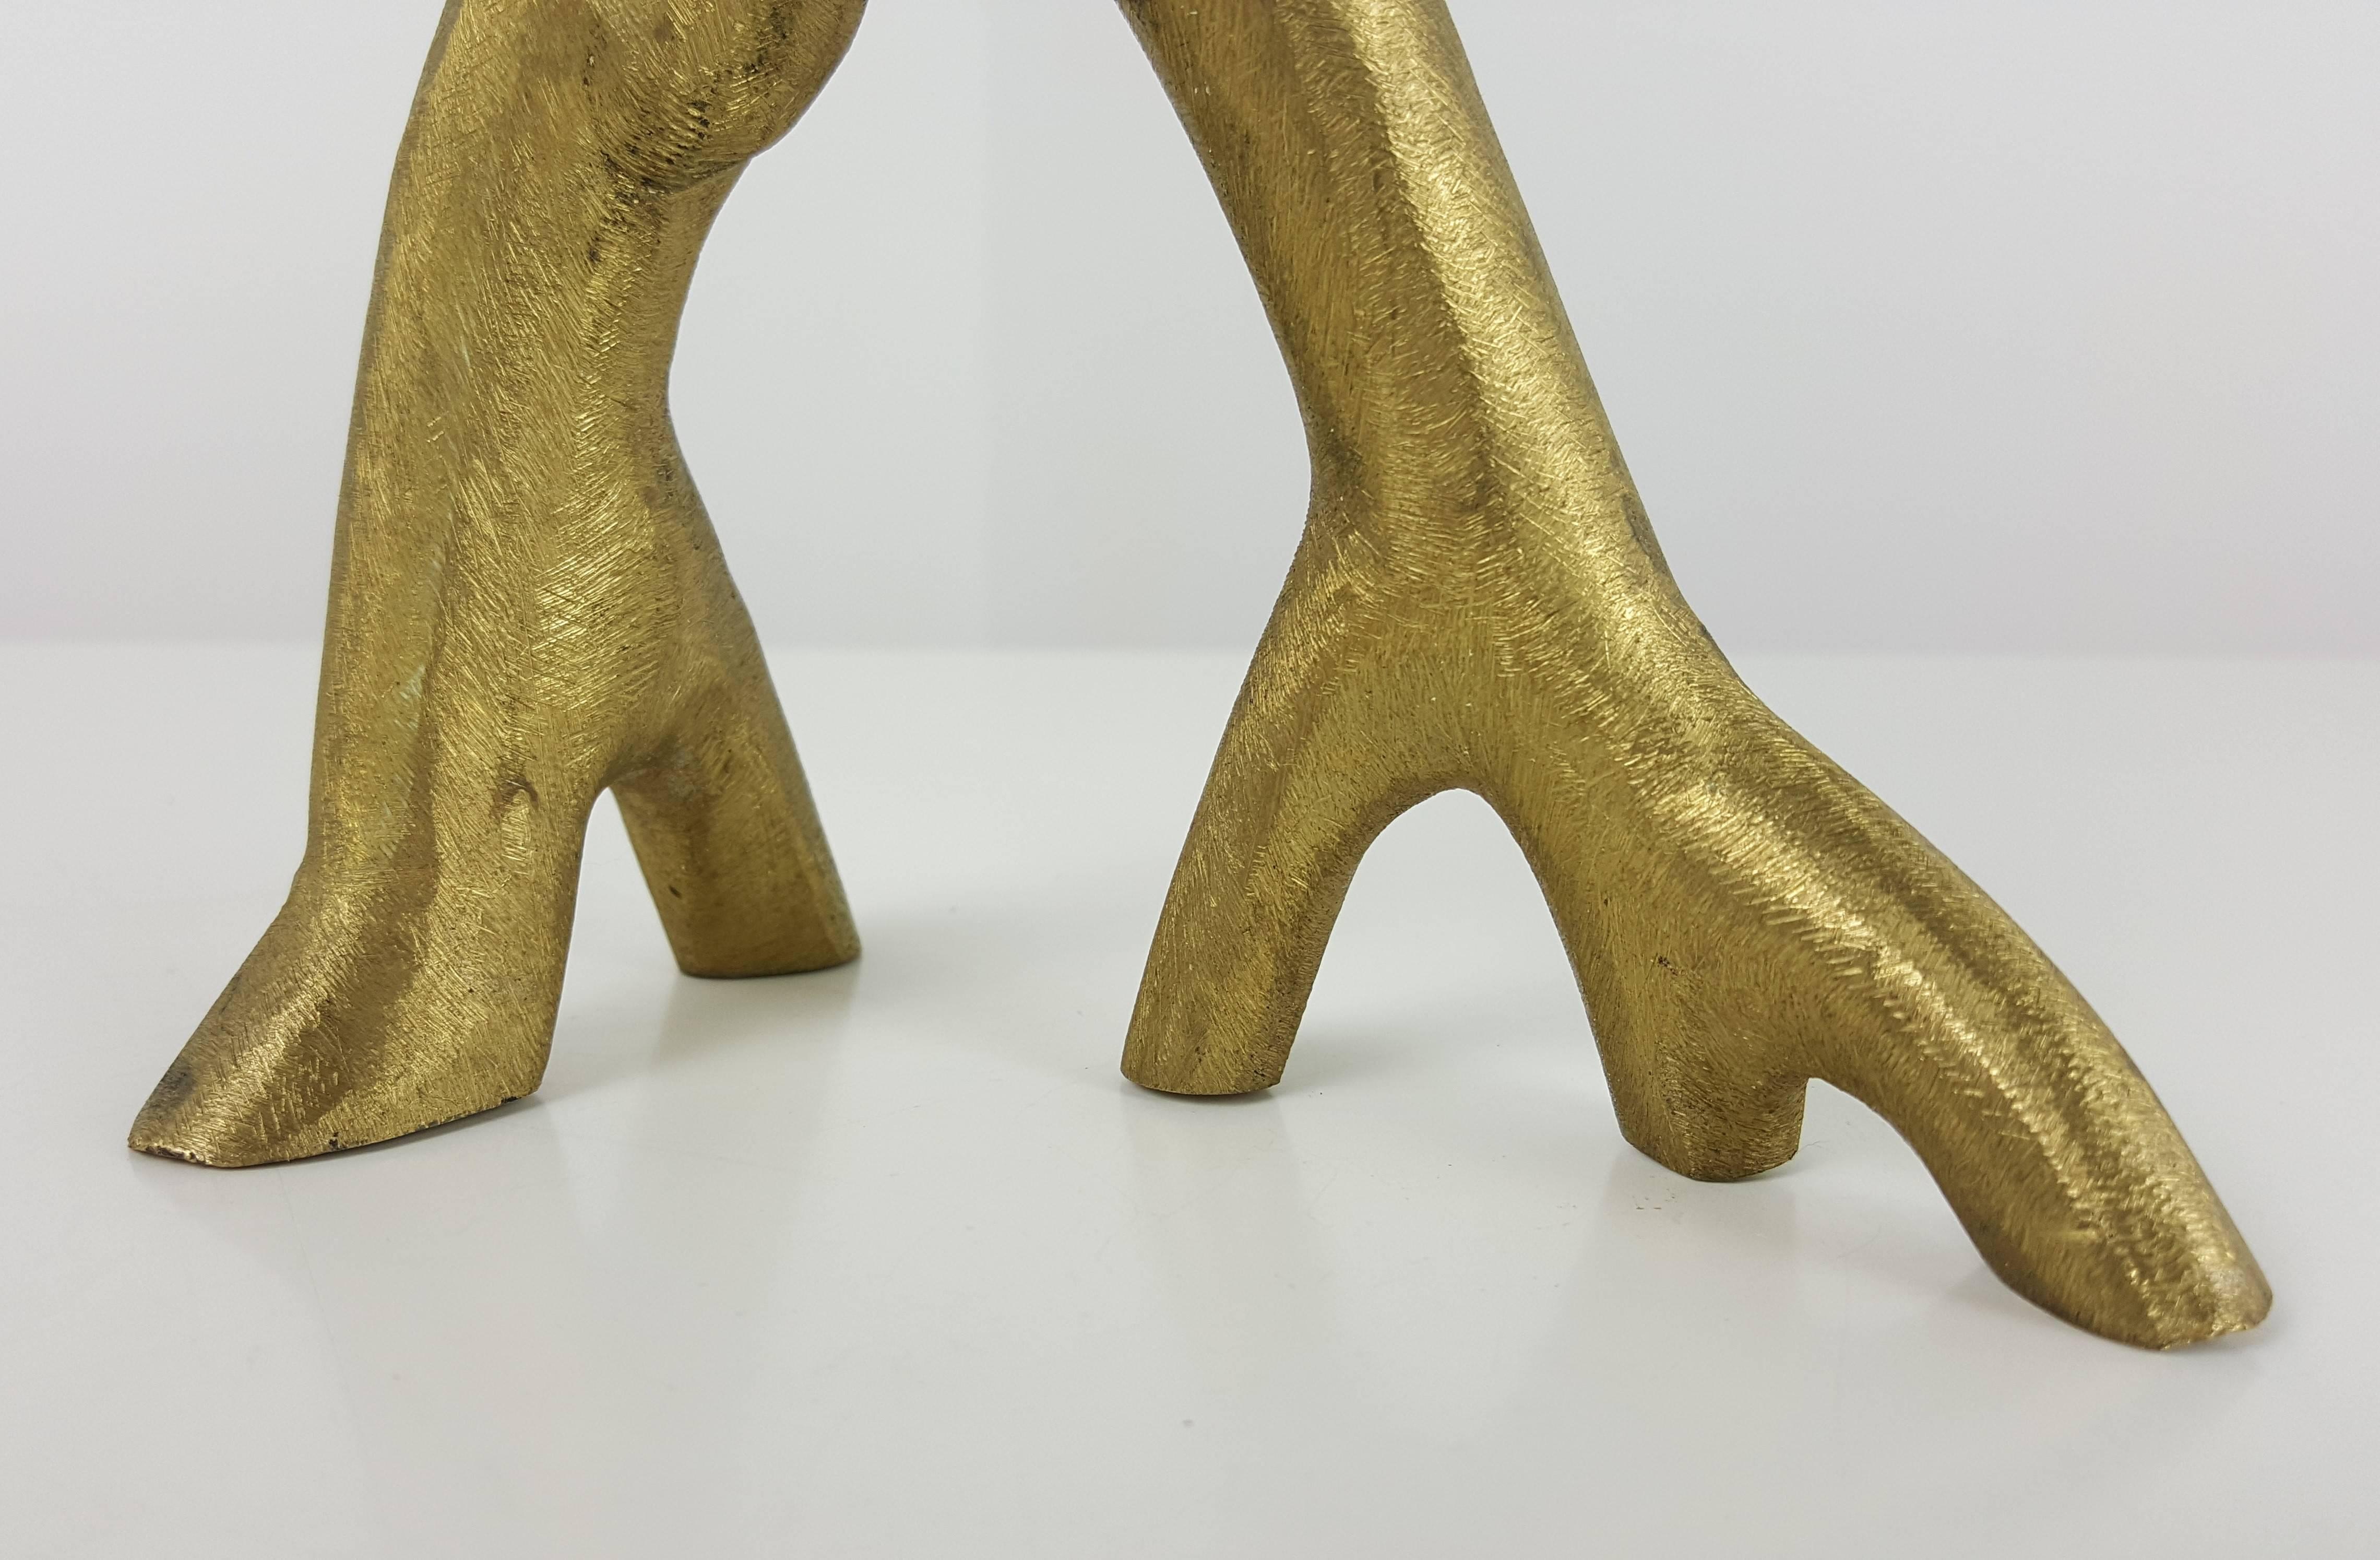 Early hand-forged brass candlestick by Michael Aram, signed 1992. 

We offer free regular deliveries to NYC and Philadelphia area. Delivery to DC, MD, CT and MA are available if schedule permits, please message for a location-based delivery quote.